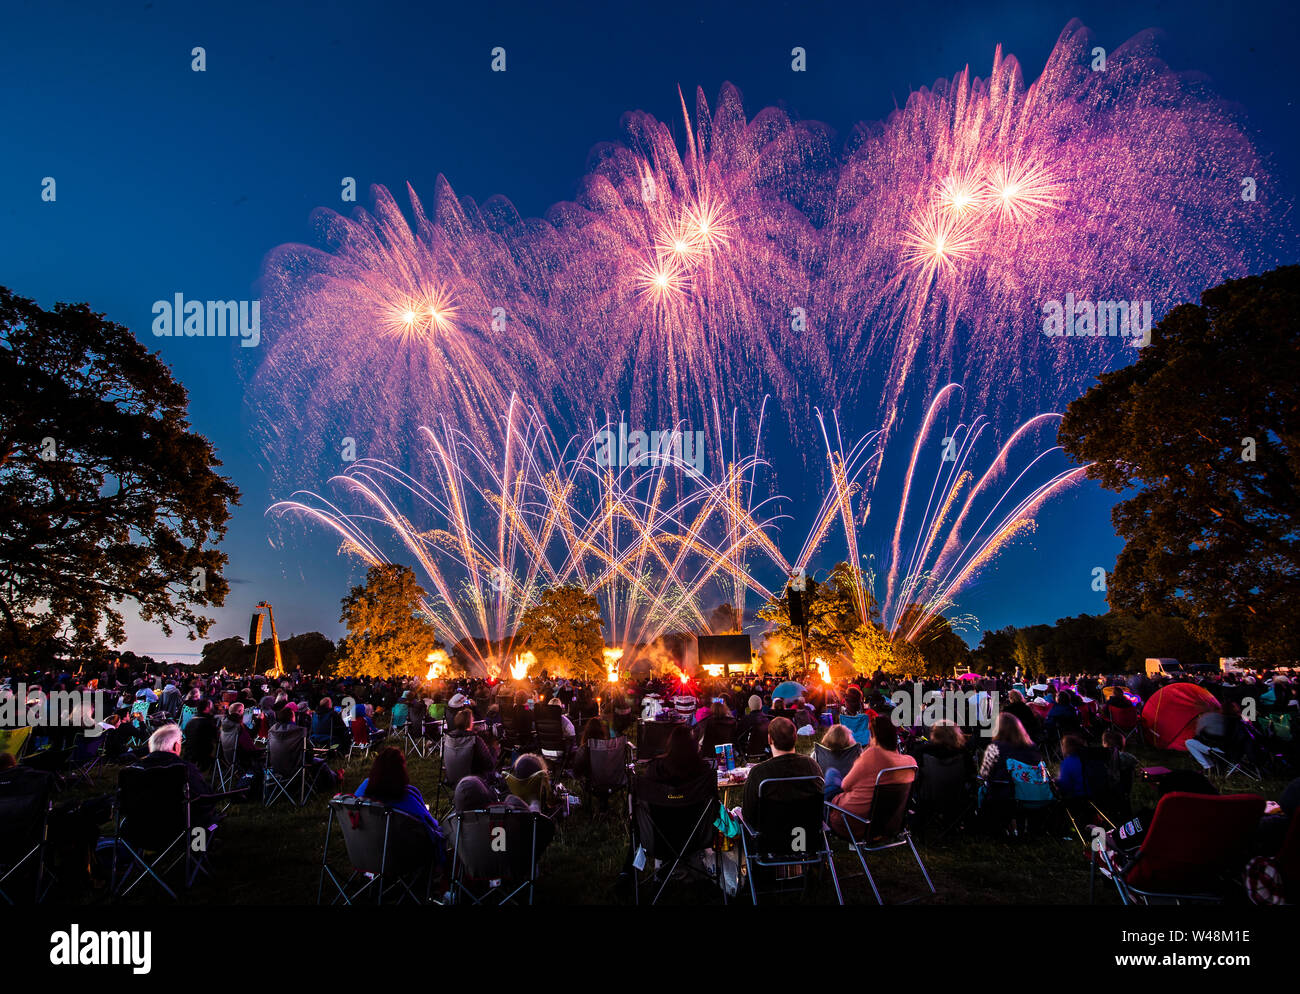 Thousands of people watch a fireworks display, as the UK's finest fireworks companies compete during the Fireworks Champions at Newby Hall in Yorkshire. Stock Photo